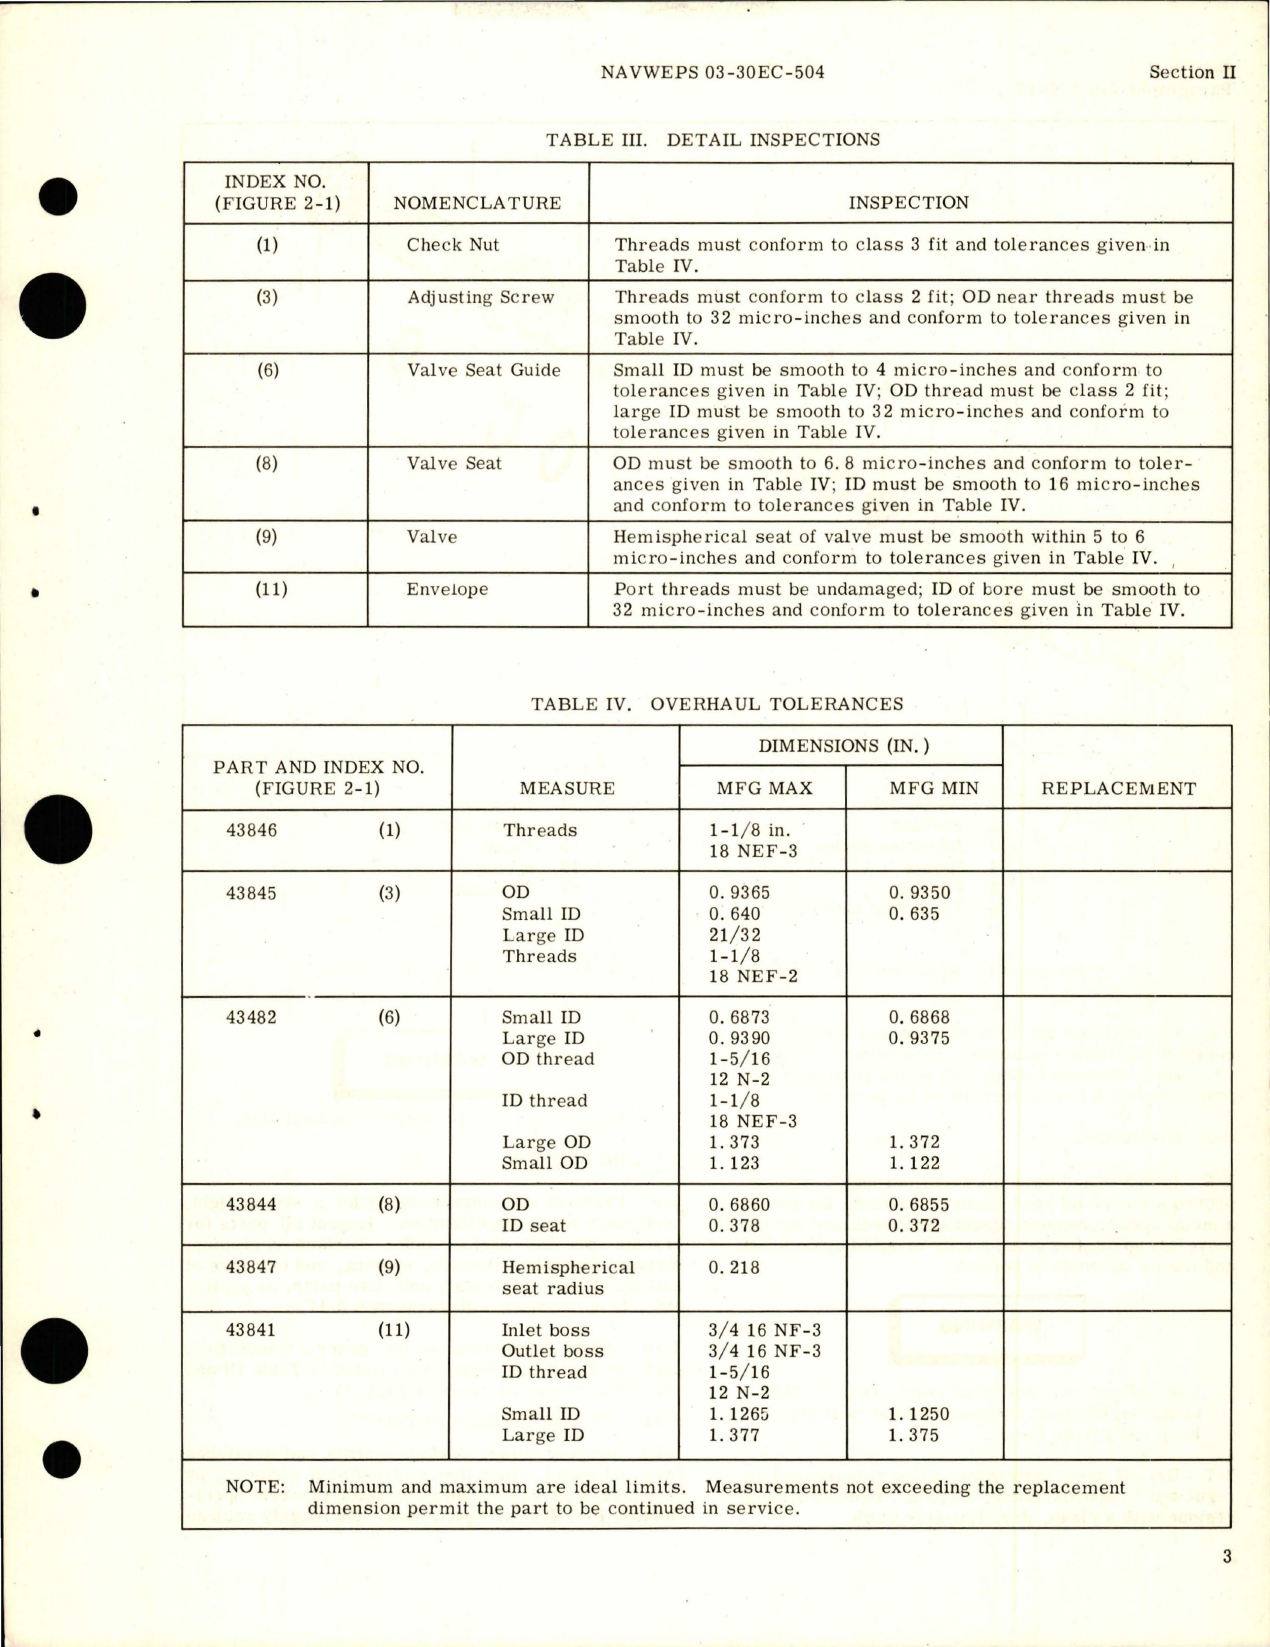 Sample page 7 from AirCorps Library document: Overhaul Instructions for Hydraulic Pressure Relief Valves - Parts AB-8-01, AB-8-02, AB-8-02A, AB-8-03, and AB-68-04